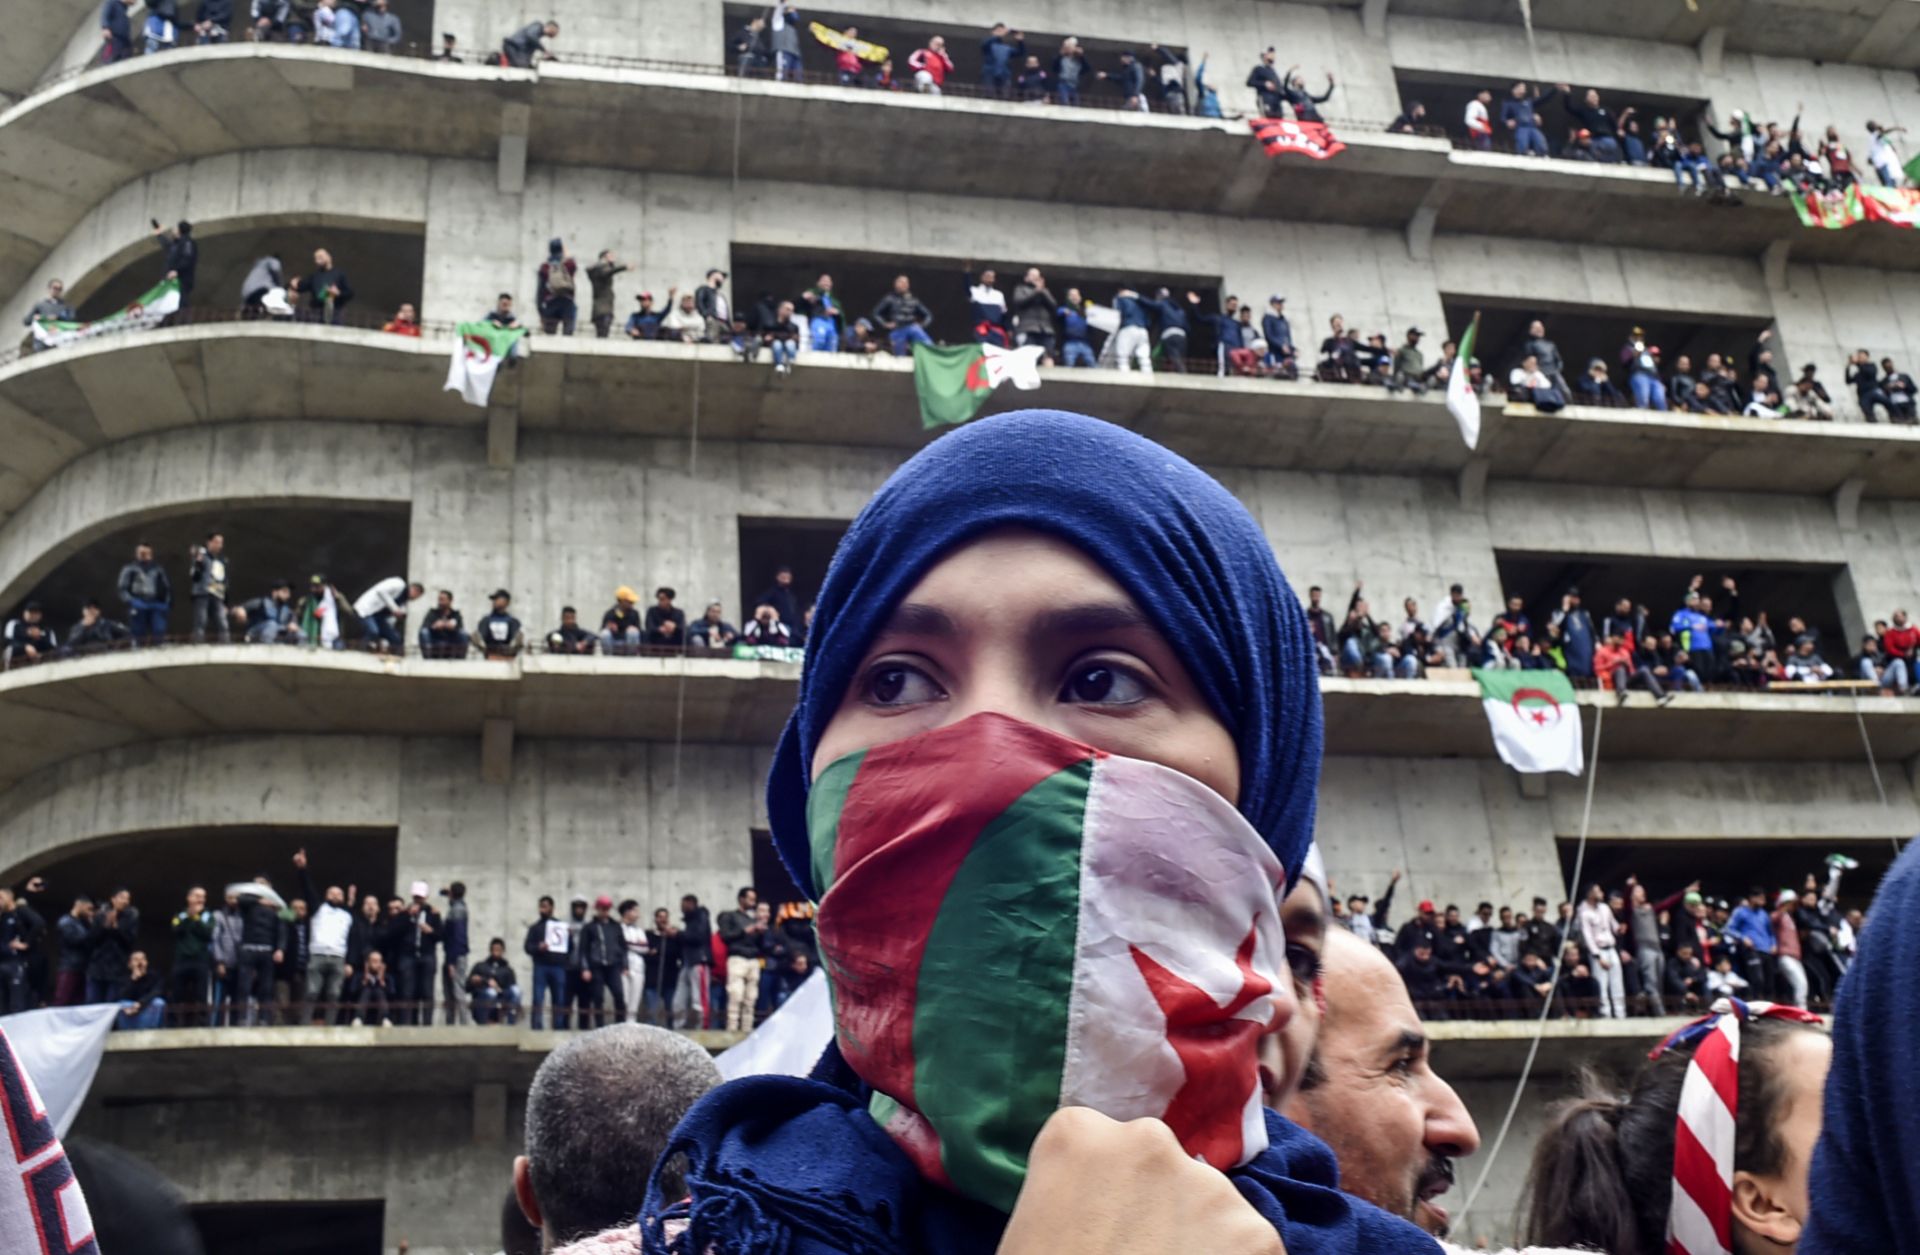 Protesters rally in Algiers on March 8 against President Abdel Aziz Bouteflika's bid for a fifth term. Bouteflika announced on March 11 that he would not seek re-election and then postponed the country's April 18 presidential election.